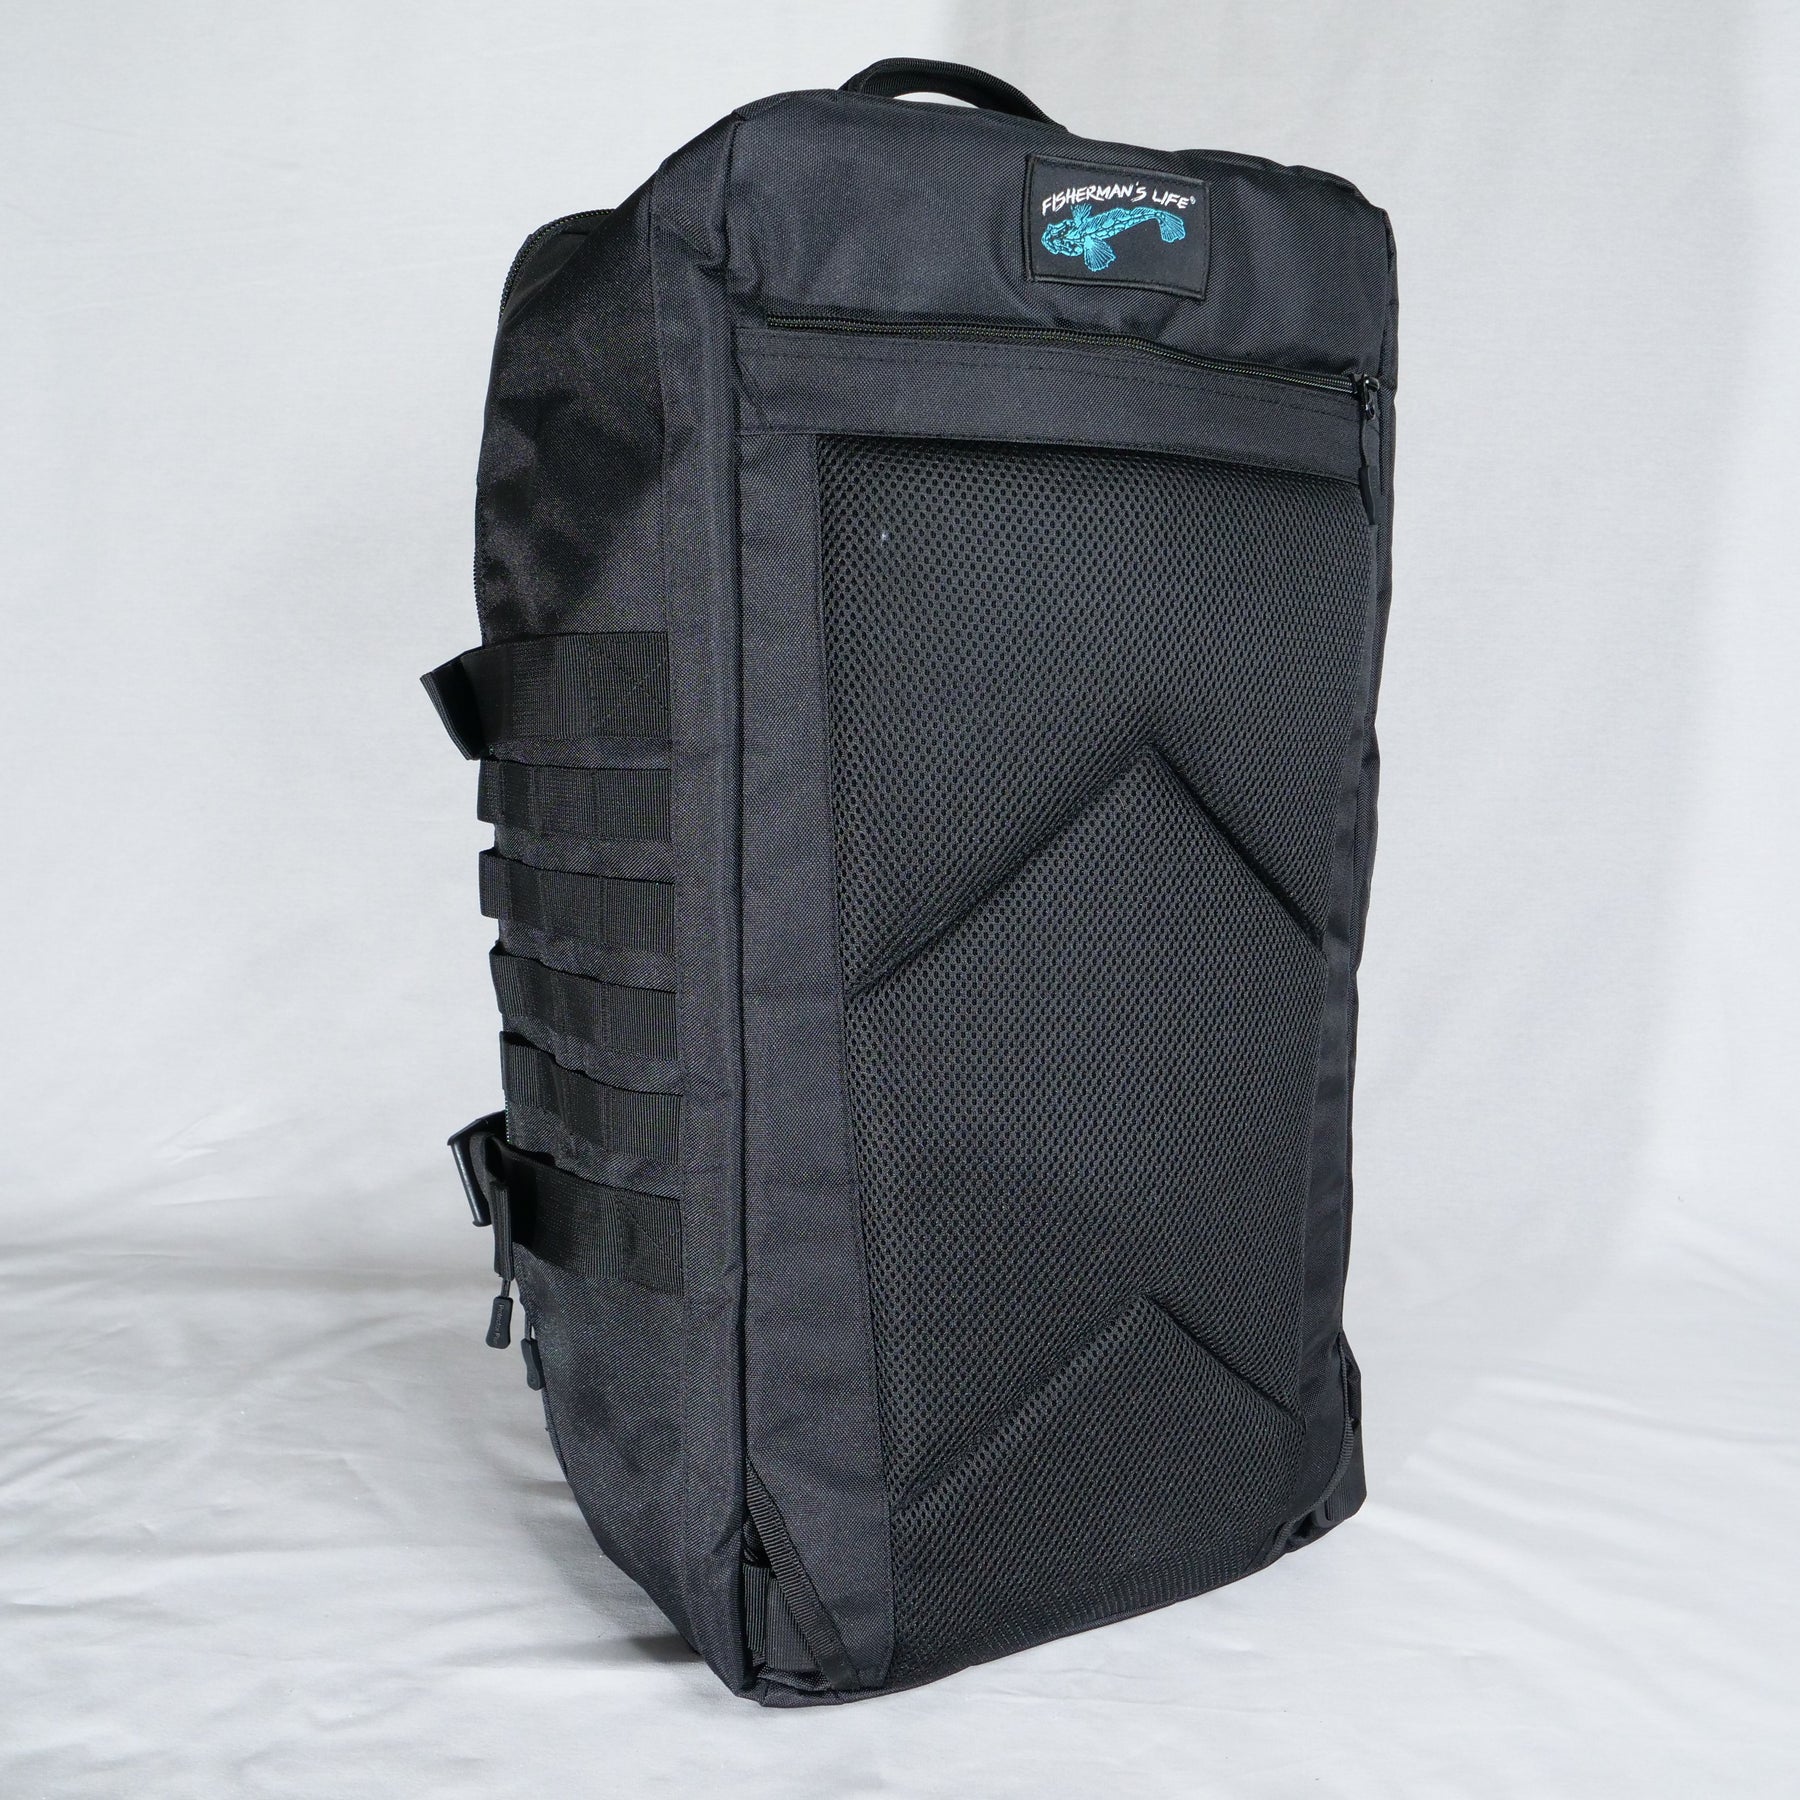 Fisherman's Life XL Backpack: Water-resistant, Carry-On Ready, Rod